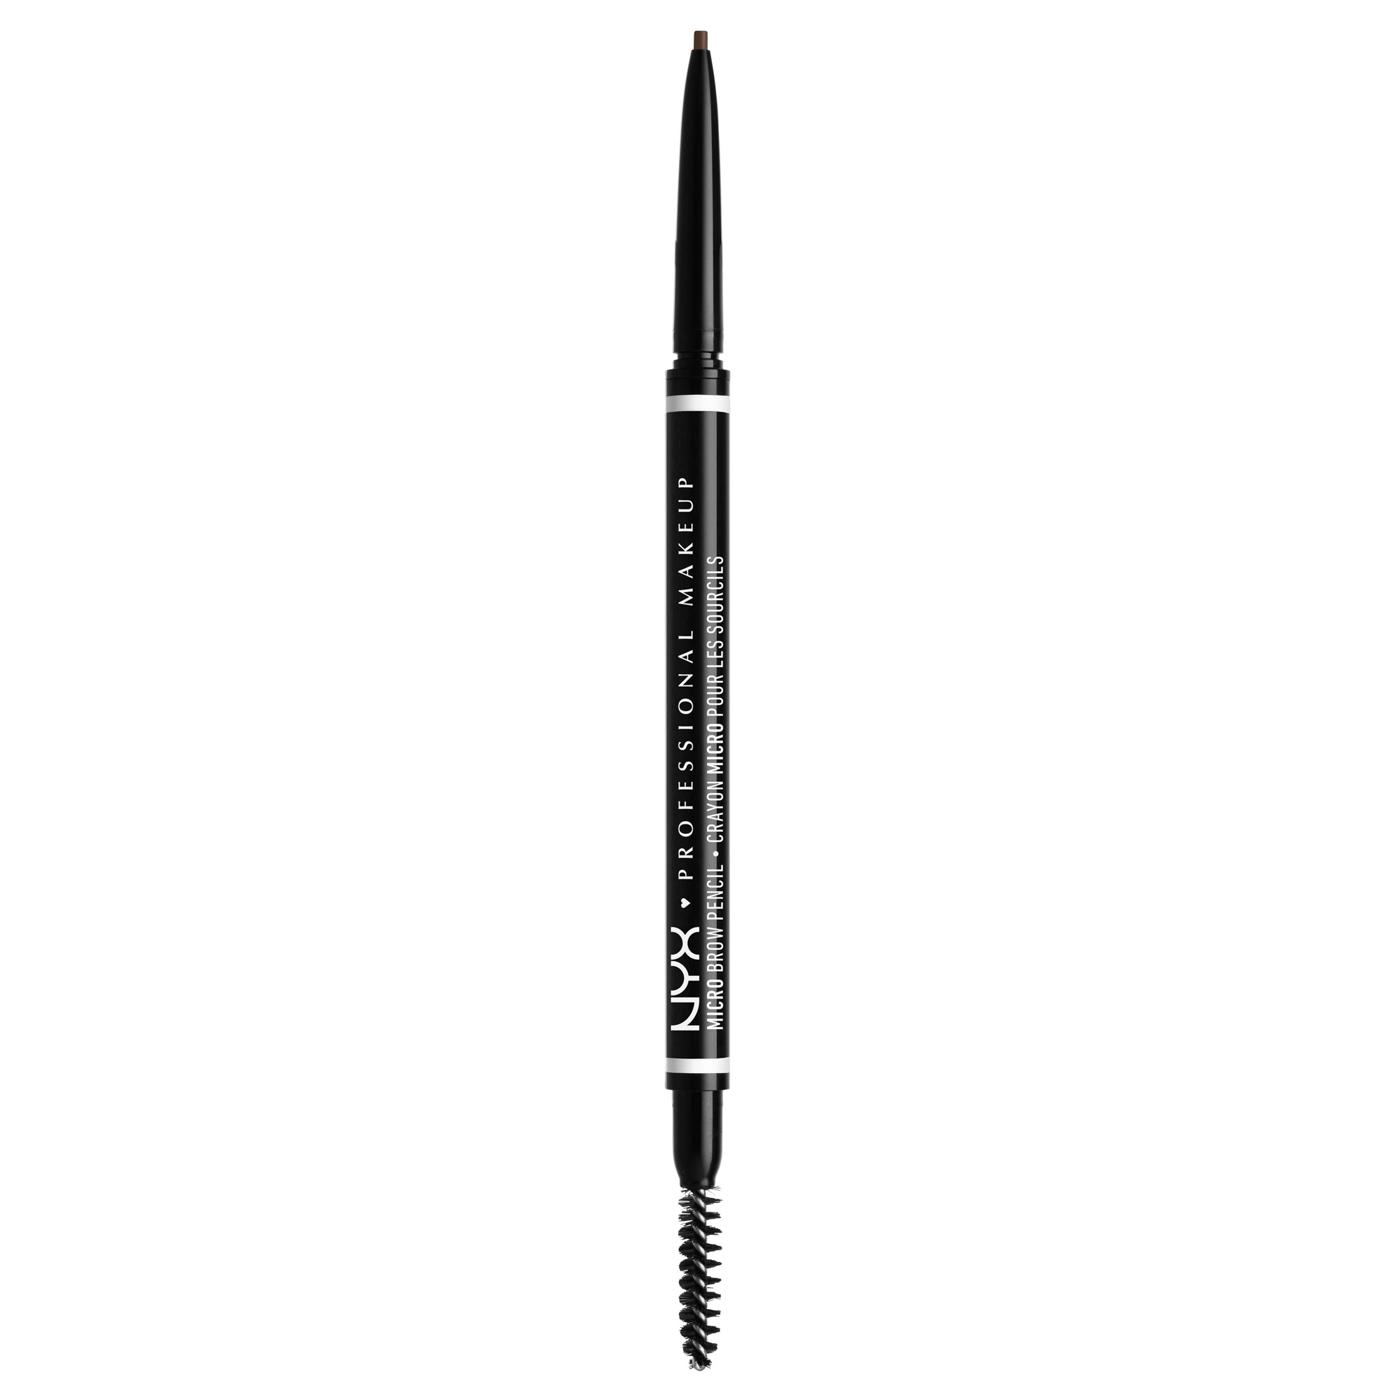 NYX Micro Brow Pencil - Brunette; image 1 of 3